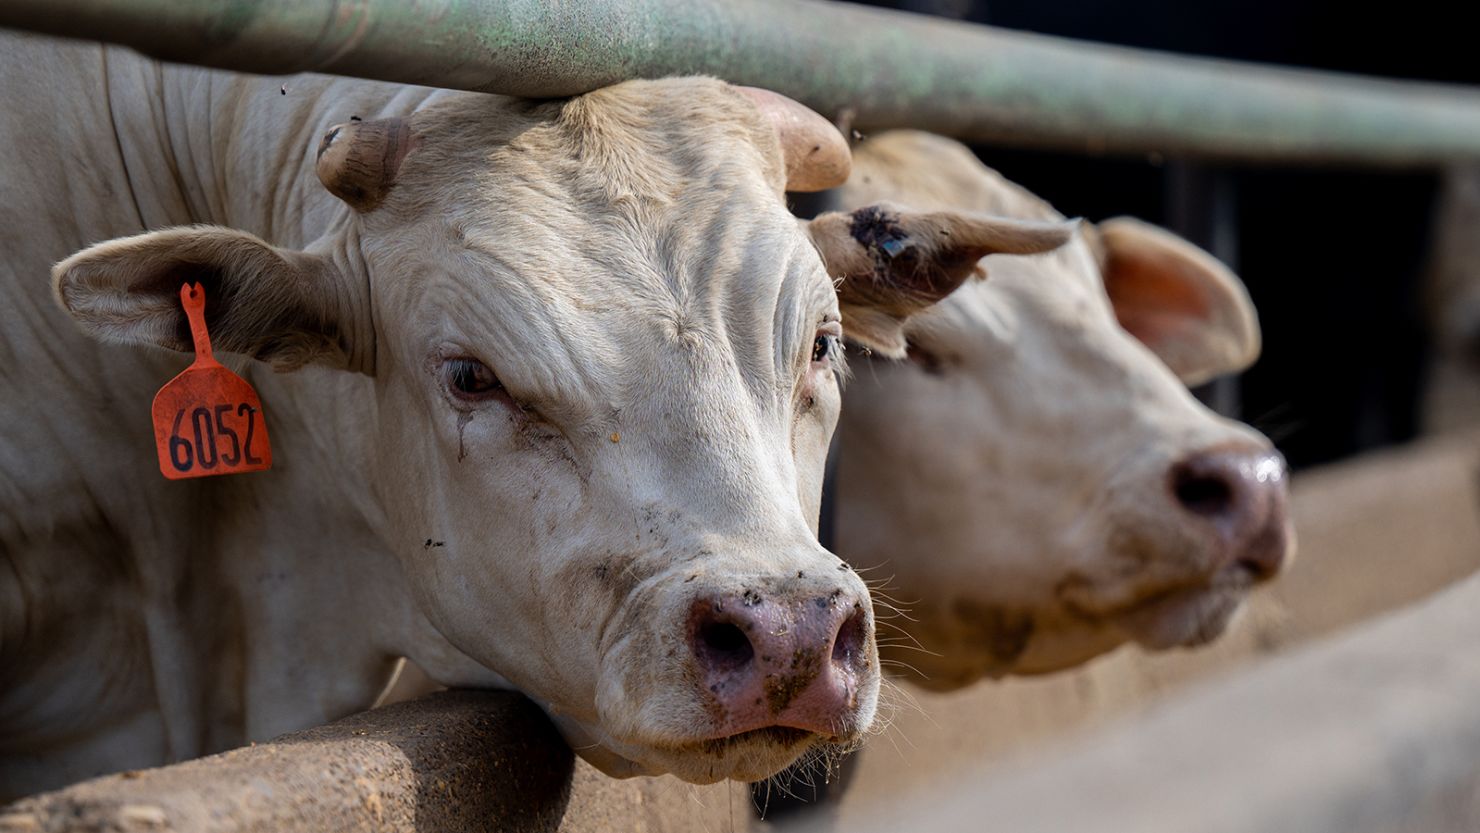 Cows are seen standing in a feedlot in June in Quemado, Texas. The USDA has counted more than 30 herds of dairy cows infected with H5N1 influenza.